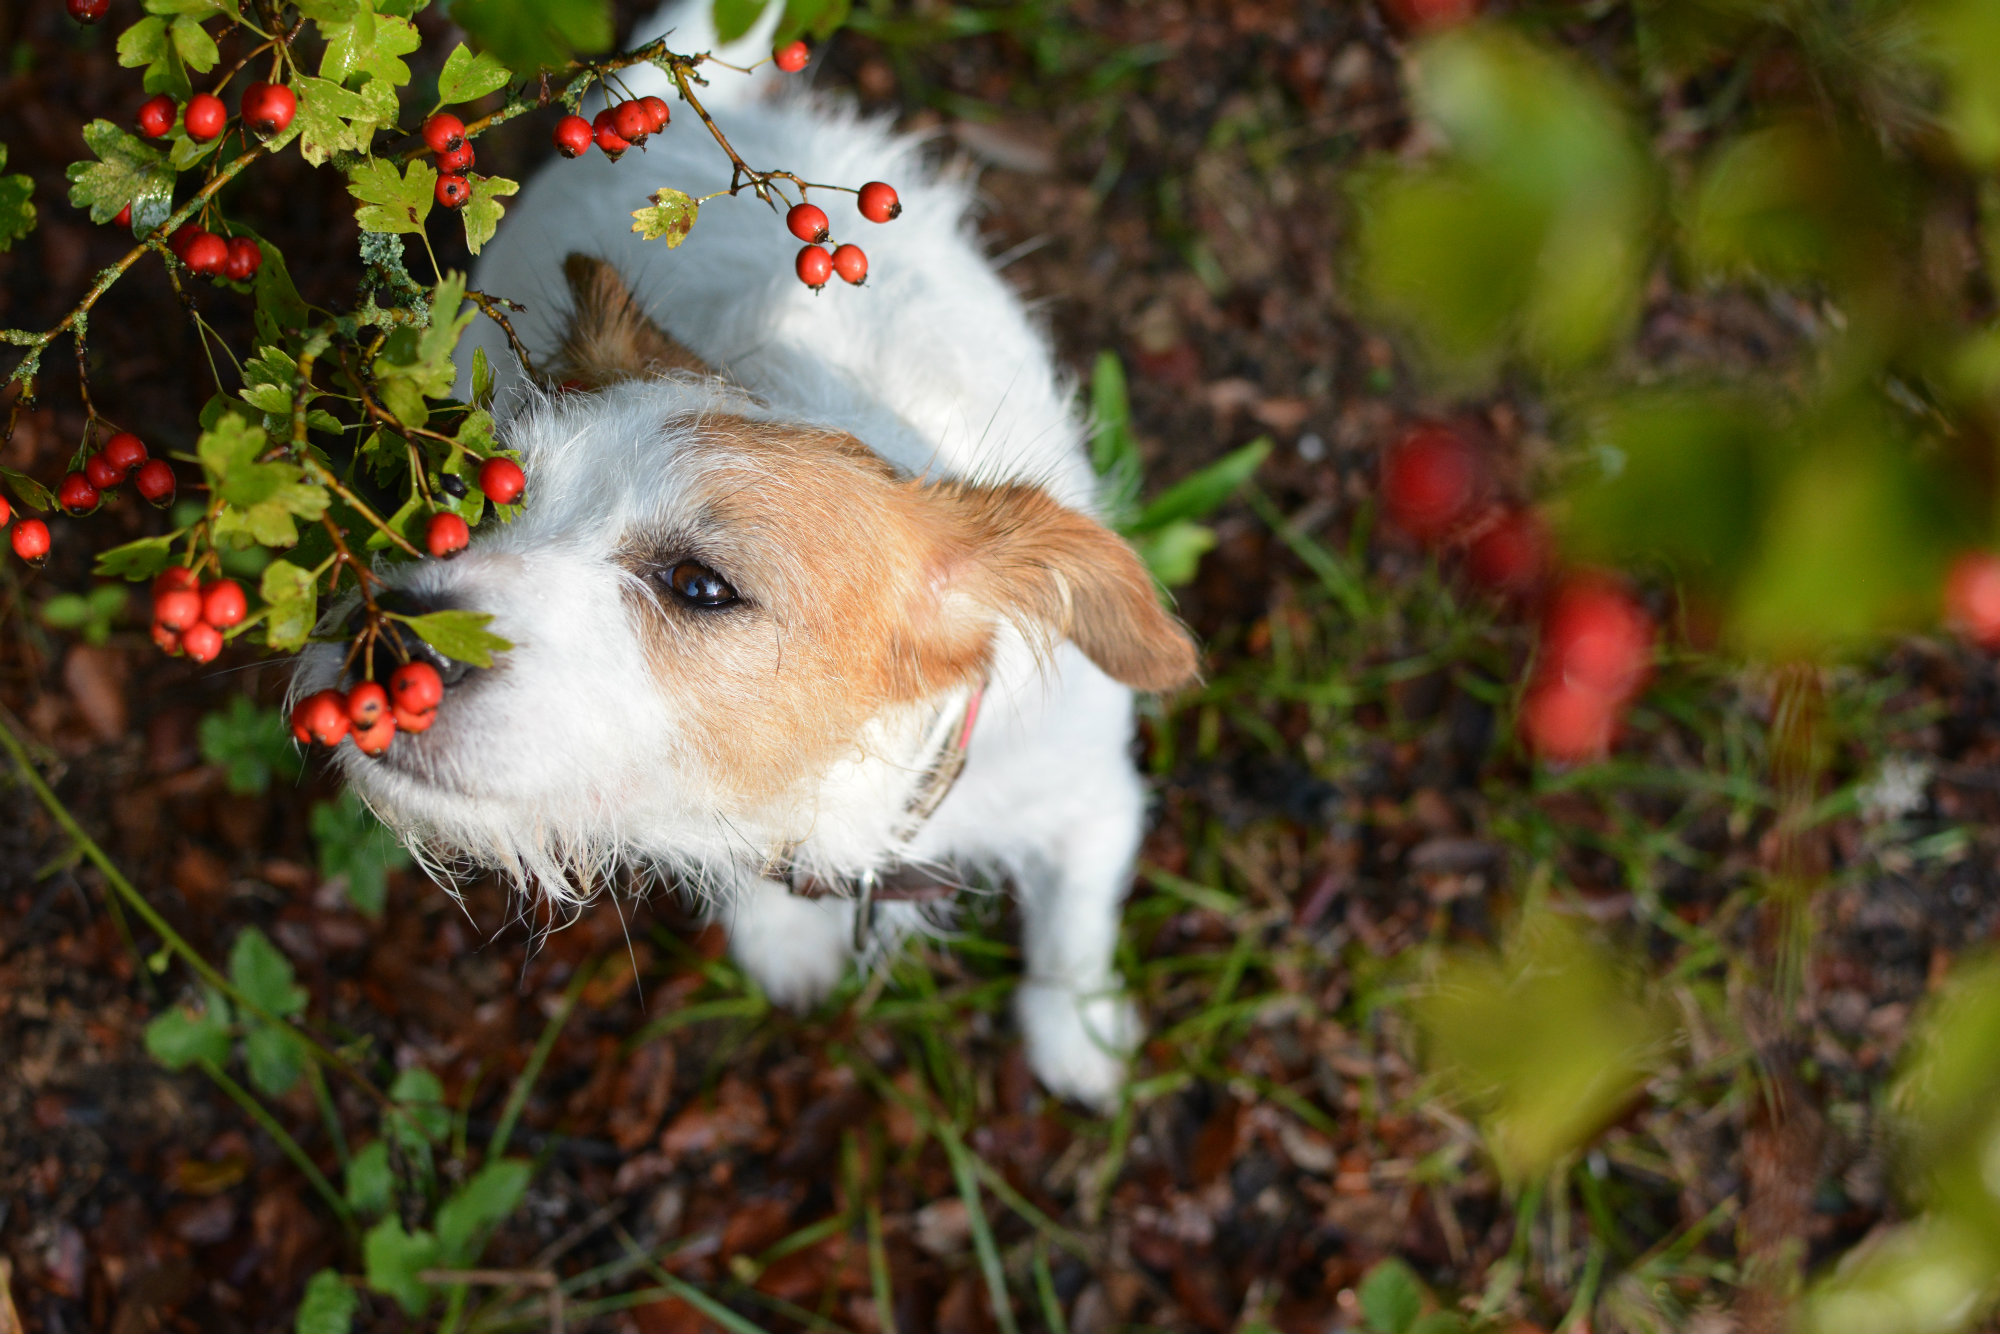 Which Hedgerow Berries Are Safe For My Dog To Eat?